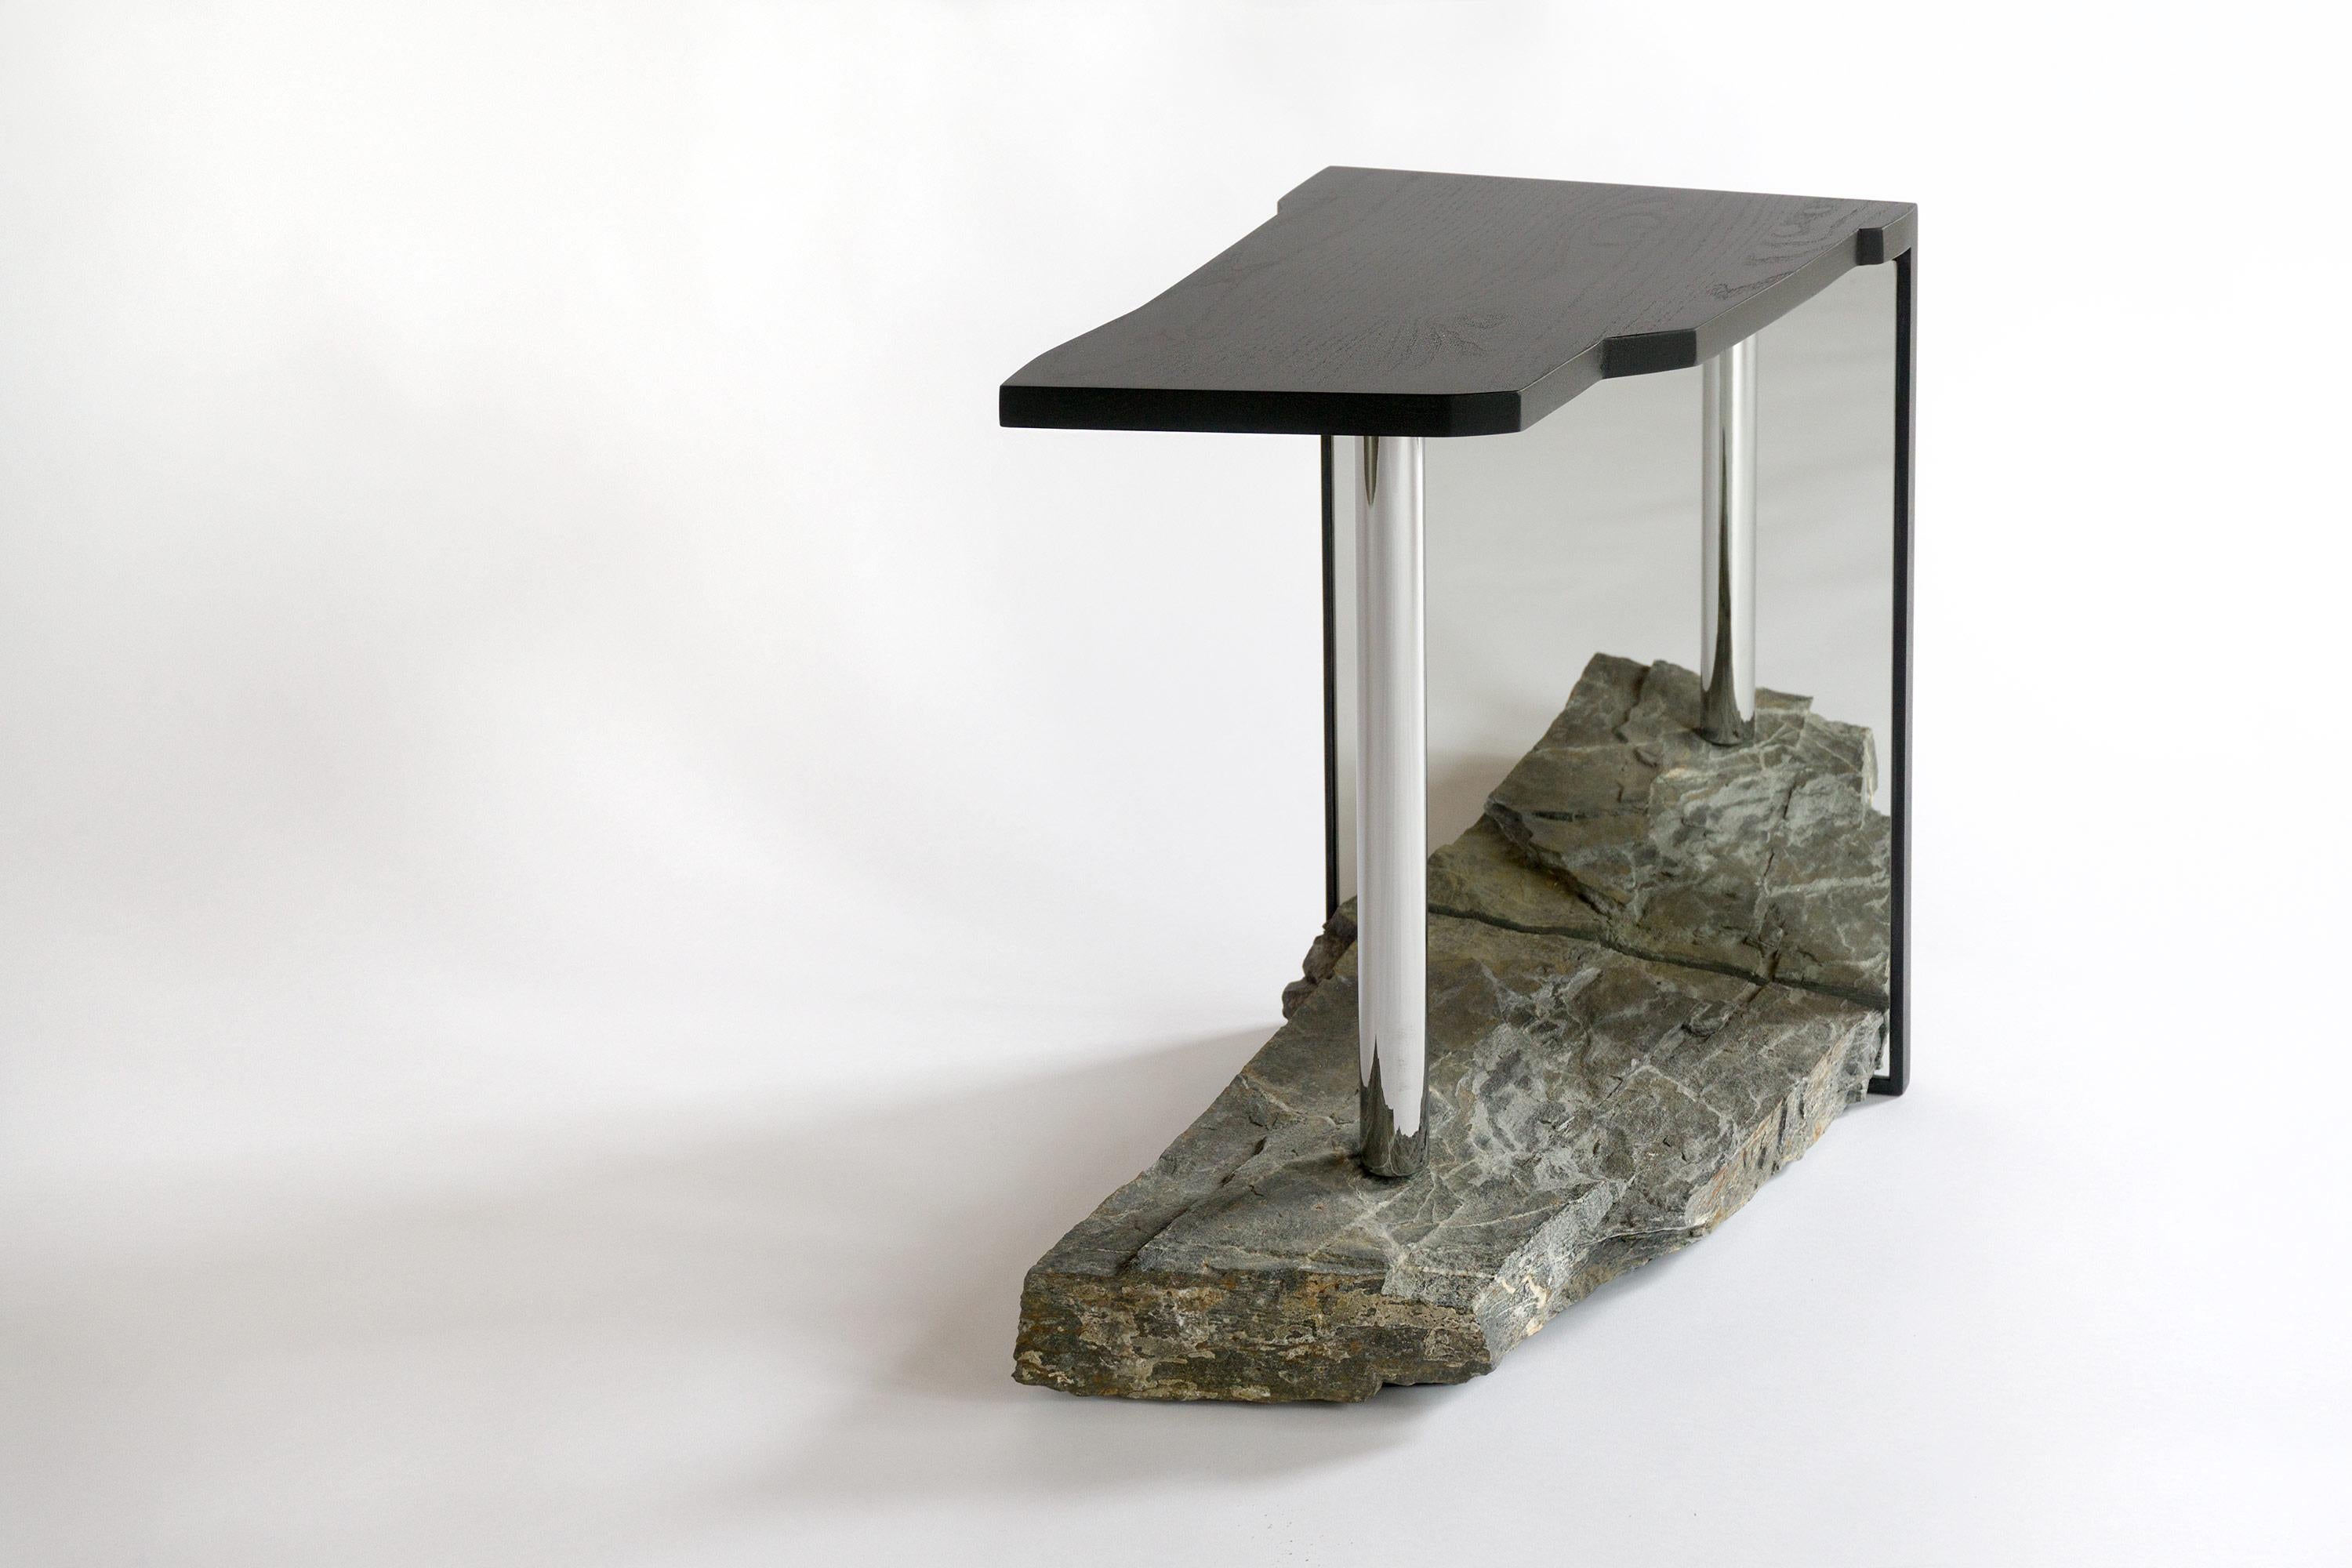 The Missisquoi №11 integrates a stone who's contour and features were traced and shaped into the tabletop, hovering above it to mirror its origins. An illusion of both airiness and infinity is created by the reflection that extends beyond the